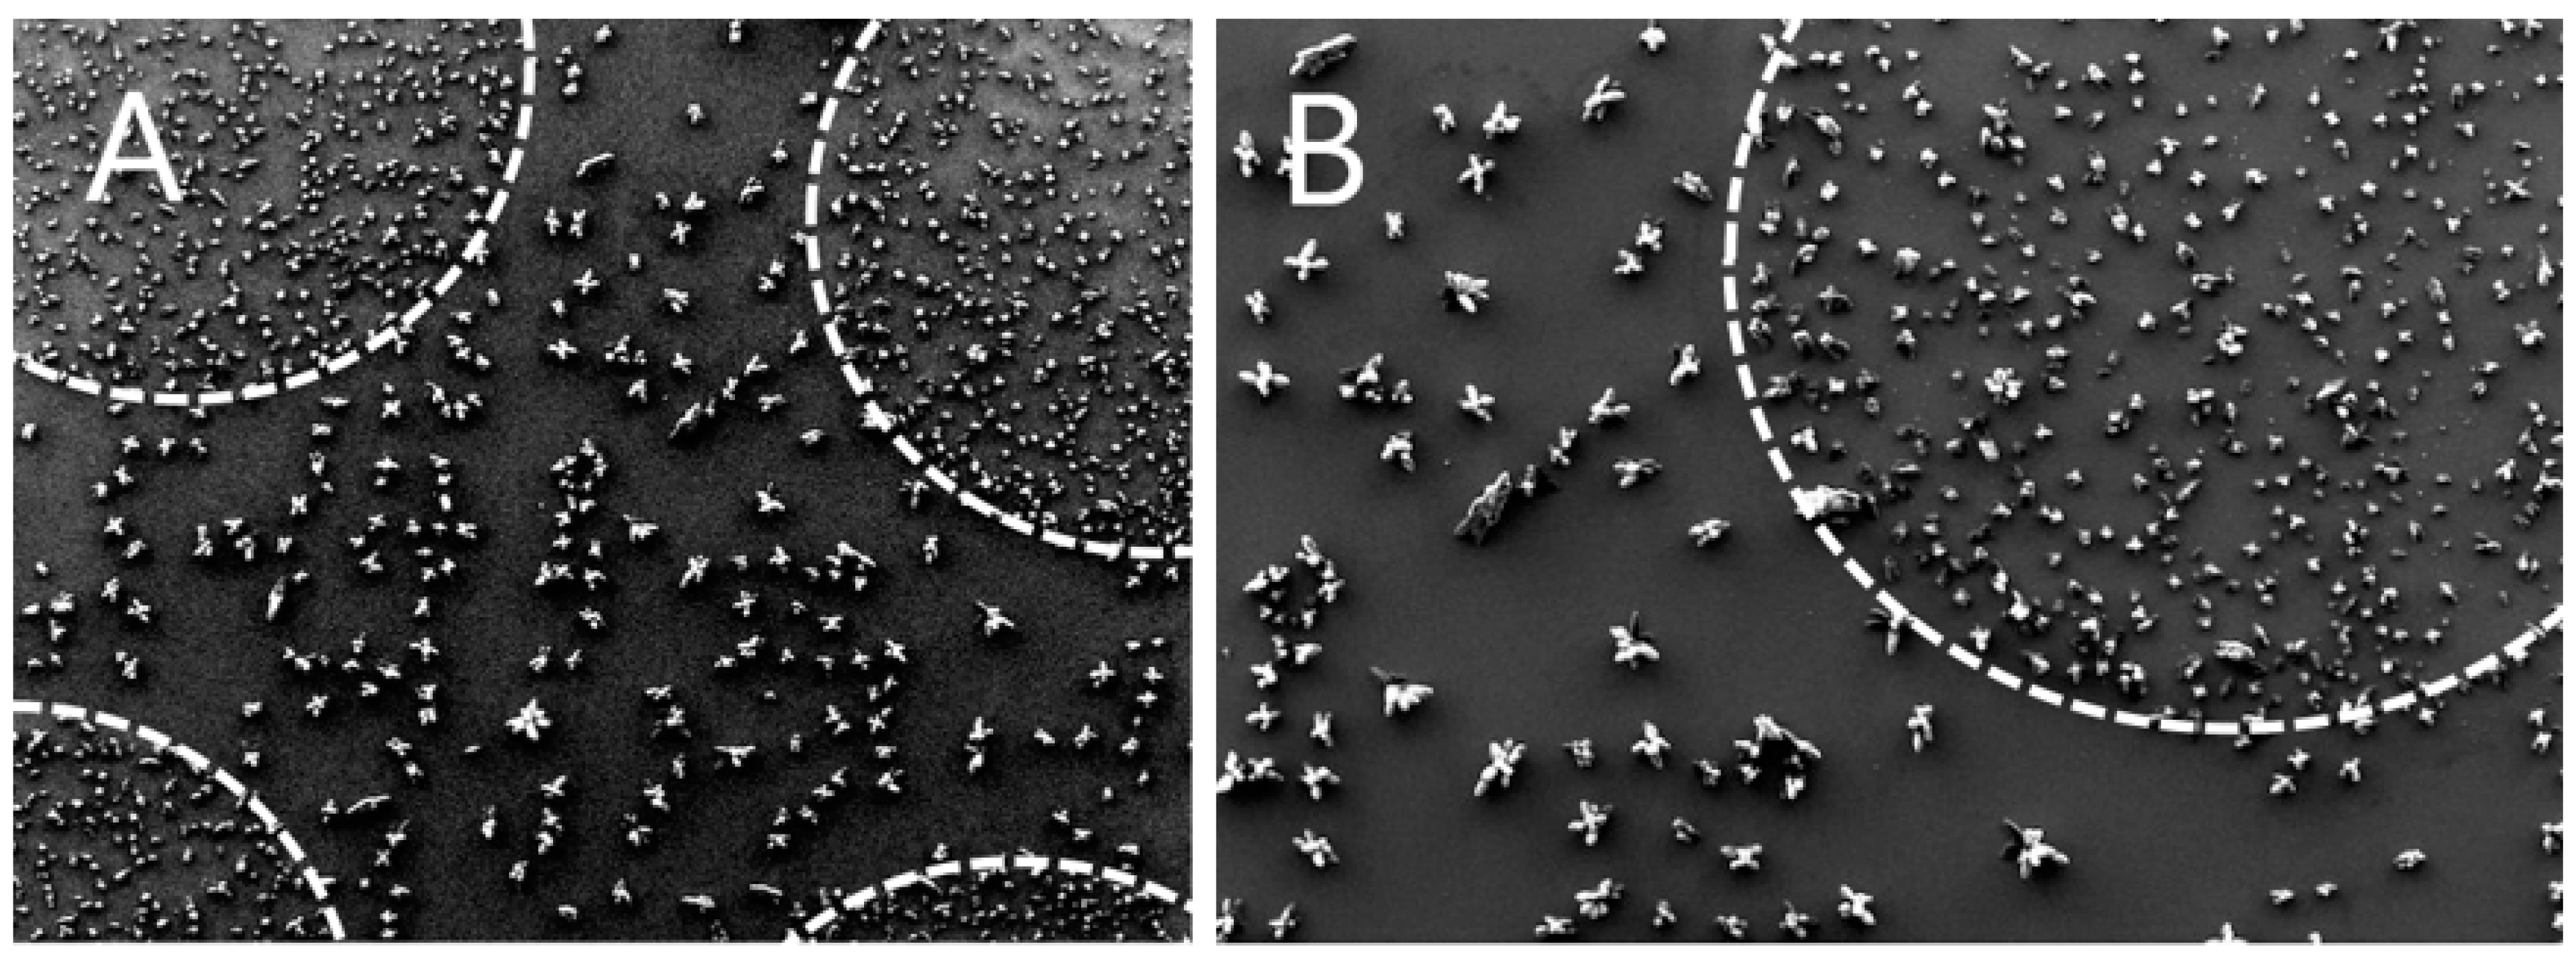 Molecules | Free Full-Text | Cluster-Assembled Nanoporous Super-Hydrophilic  Smart Surfaces for On-Target Capturing and Processing of Biological Samples  for Multi-Dimensional MALDI-MS